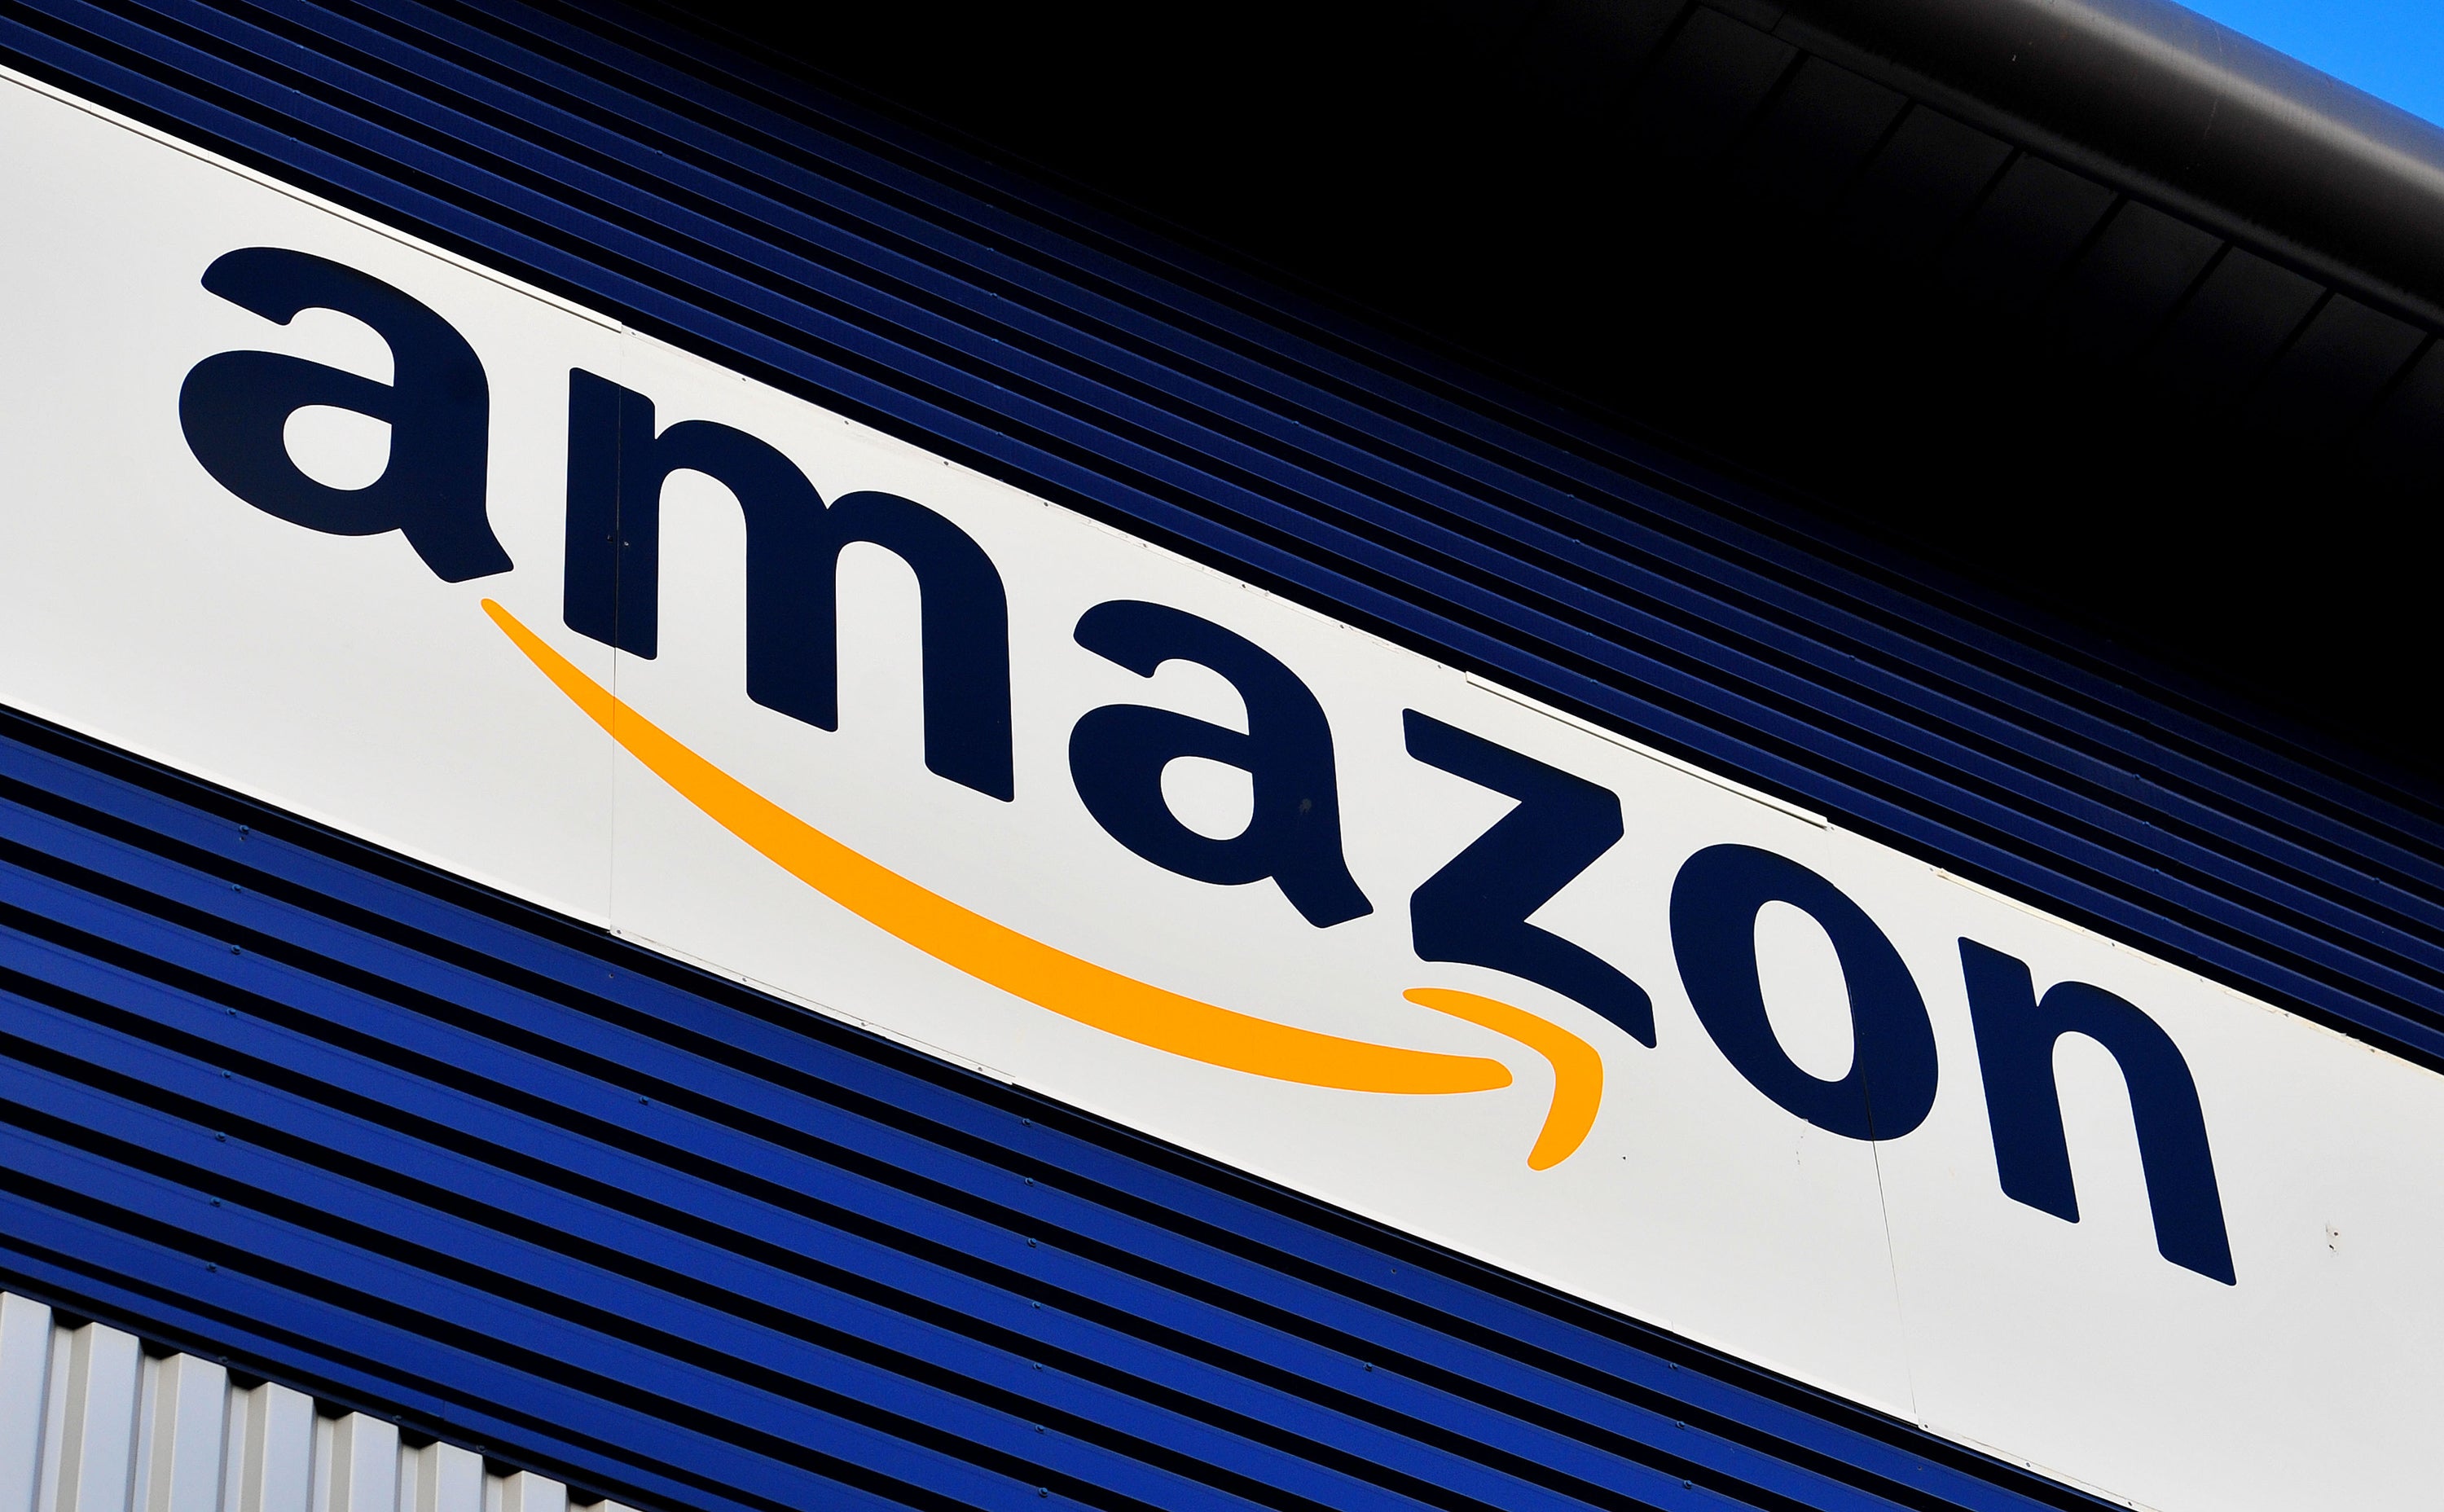 <p>Make Amazon Pay will use eight locations to demonstrate what it describes as ‘the depth of Amazon’s abuse and the scale and unity of resistance to it’ </p>